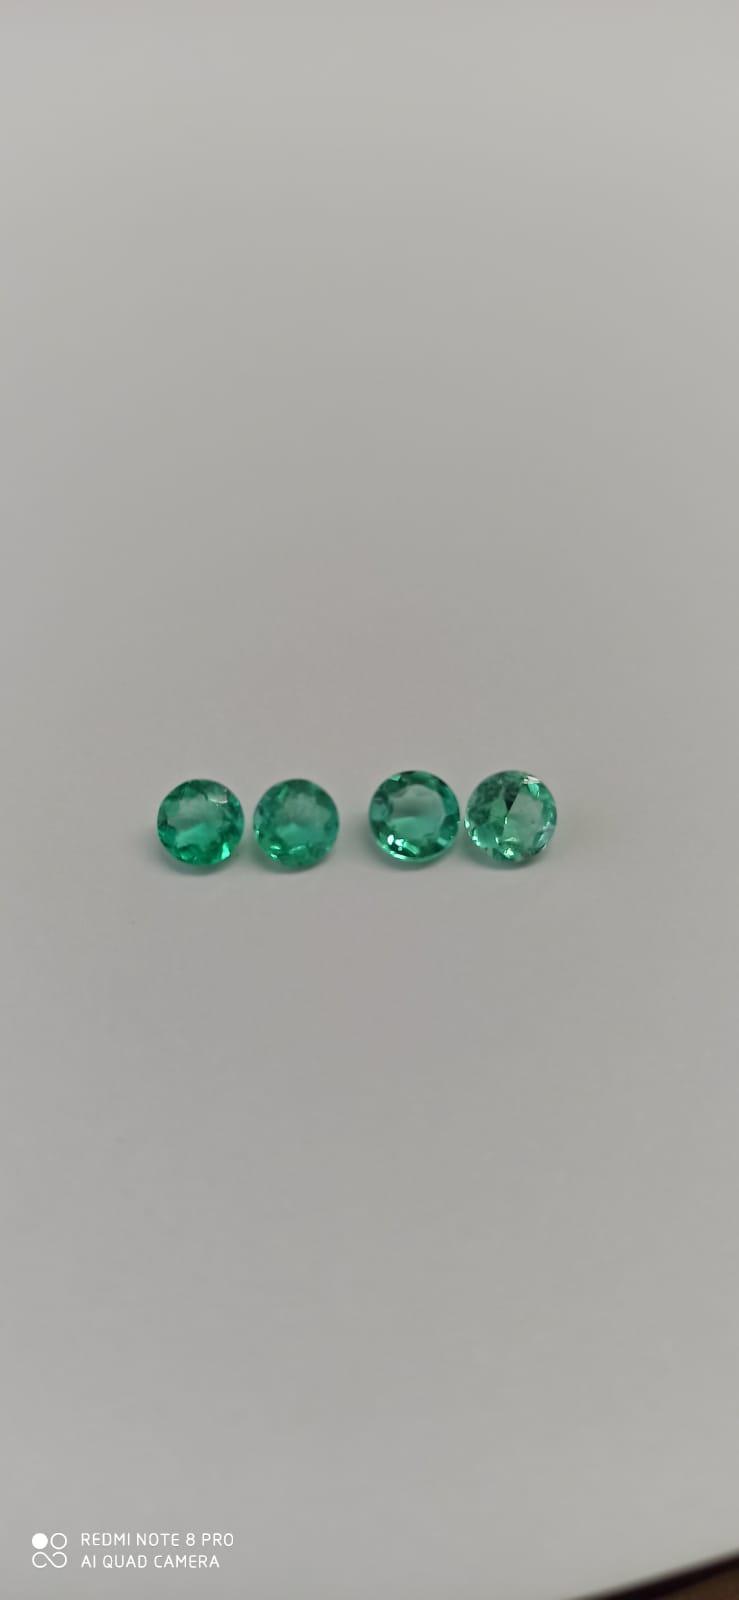 5mm Round Cut Colombian Emeralds 